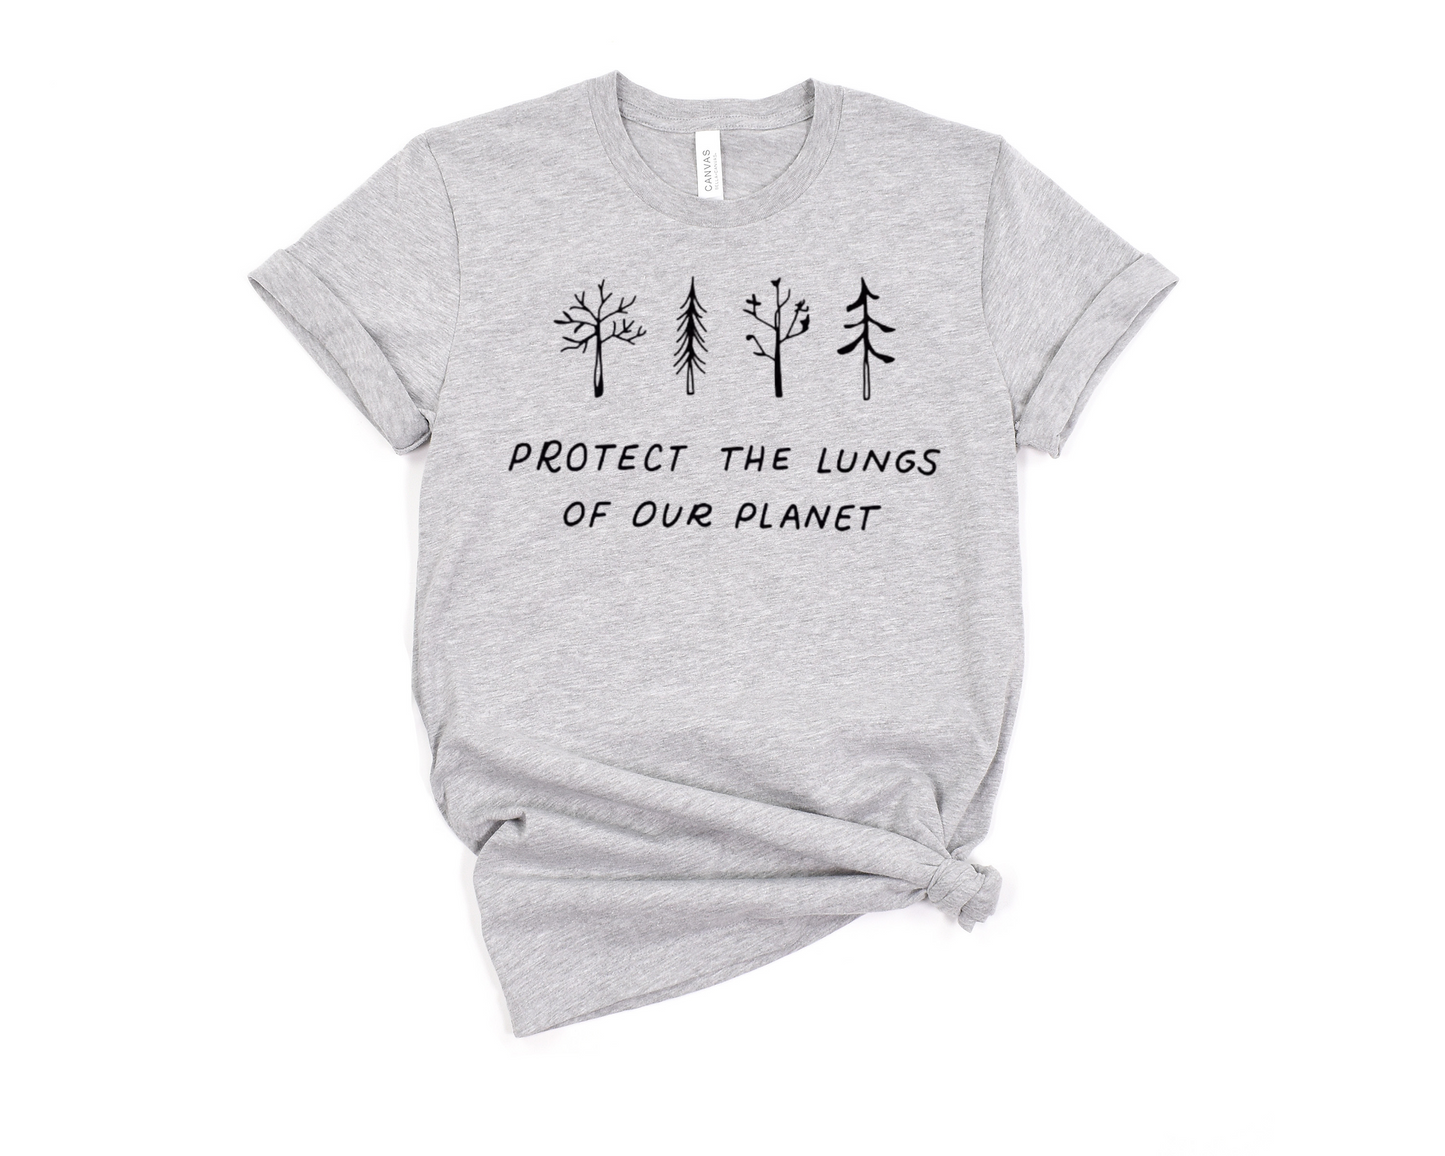 Protect The Lungs of Our Planet T-shirt